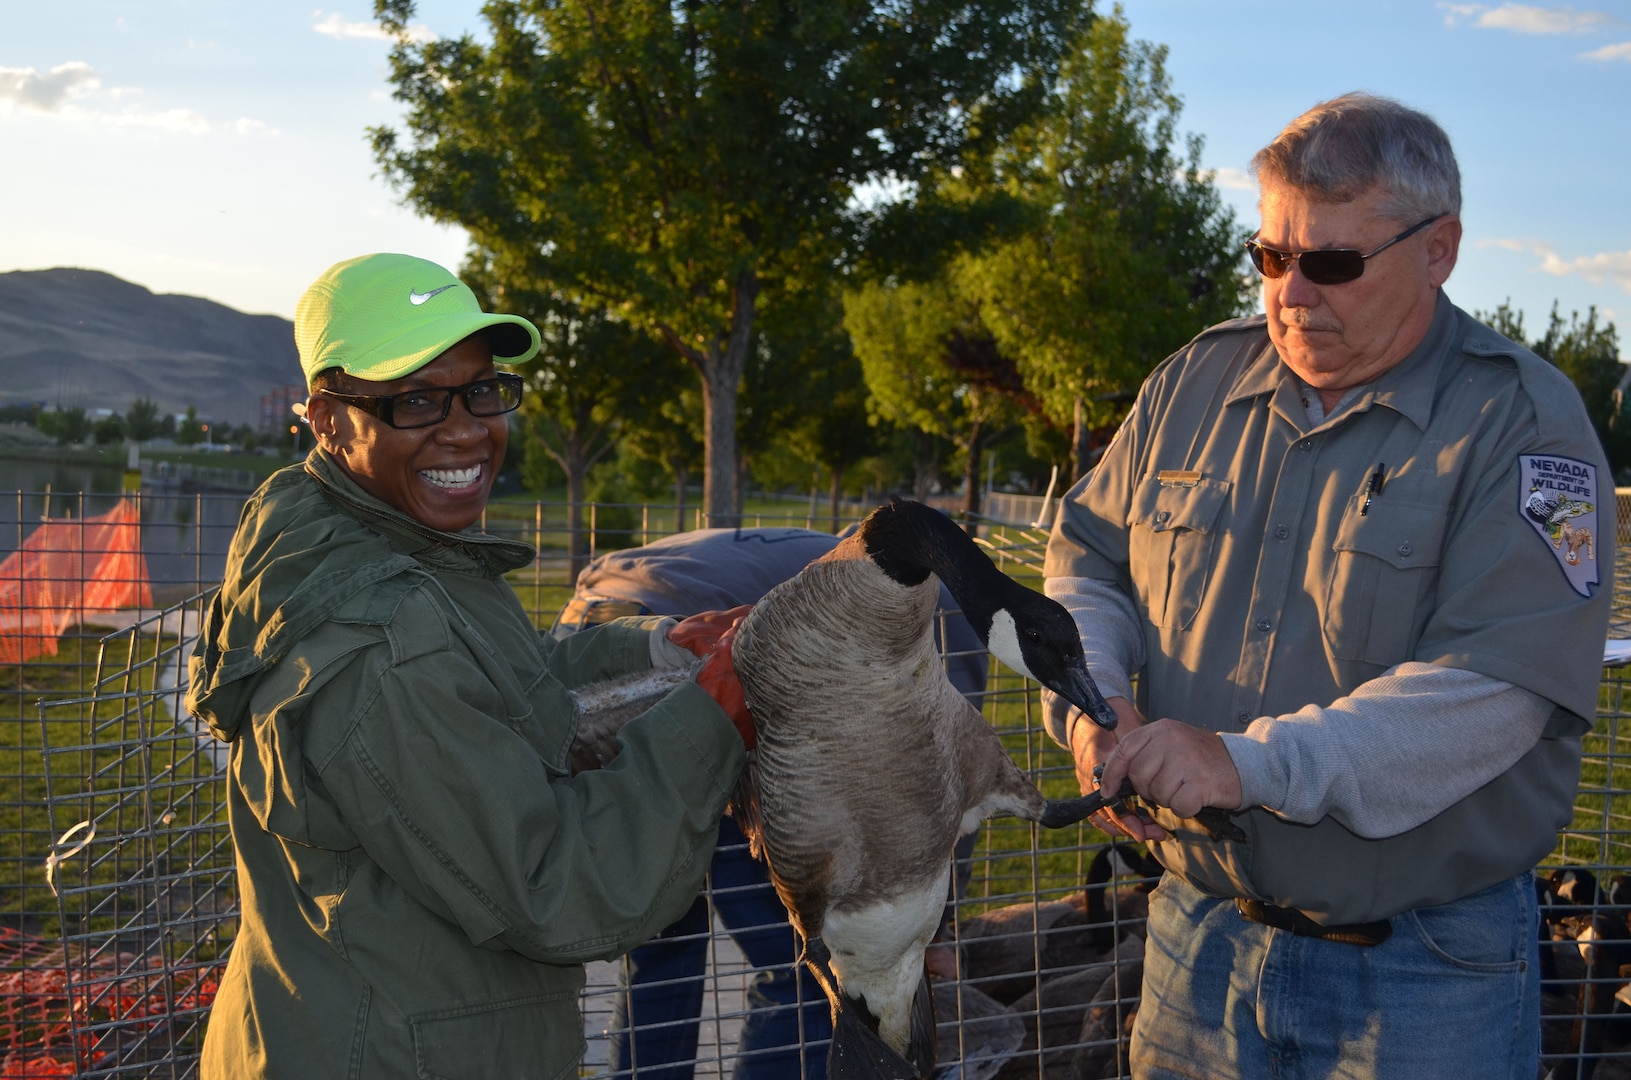 High Roller, Senior Master Sgt. Angela Ash and Nevada Department of Wildlife's Rodney Johnson help out at the 33rd Annual Canada Goose Round-Up on June 5, 2018, where the 152nd Airlift Wing worked closely with the United States Department of Agriculture and Nevada Department of Wildlife to relocate geese away from aircraft in the Reno-Tahoe region to a safer location at Carson Lake, Nevada.